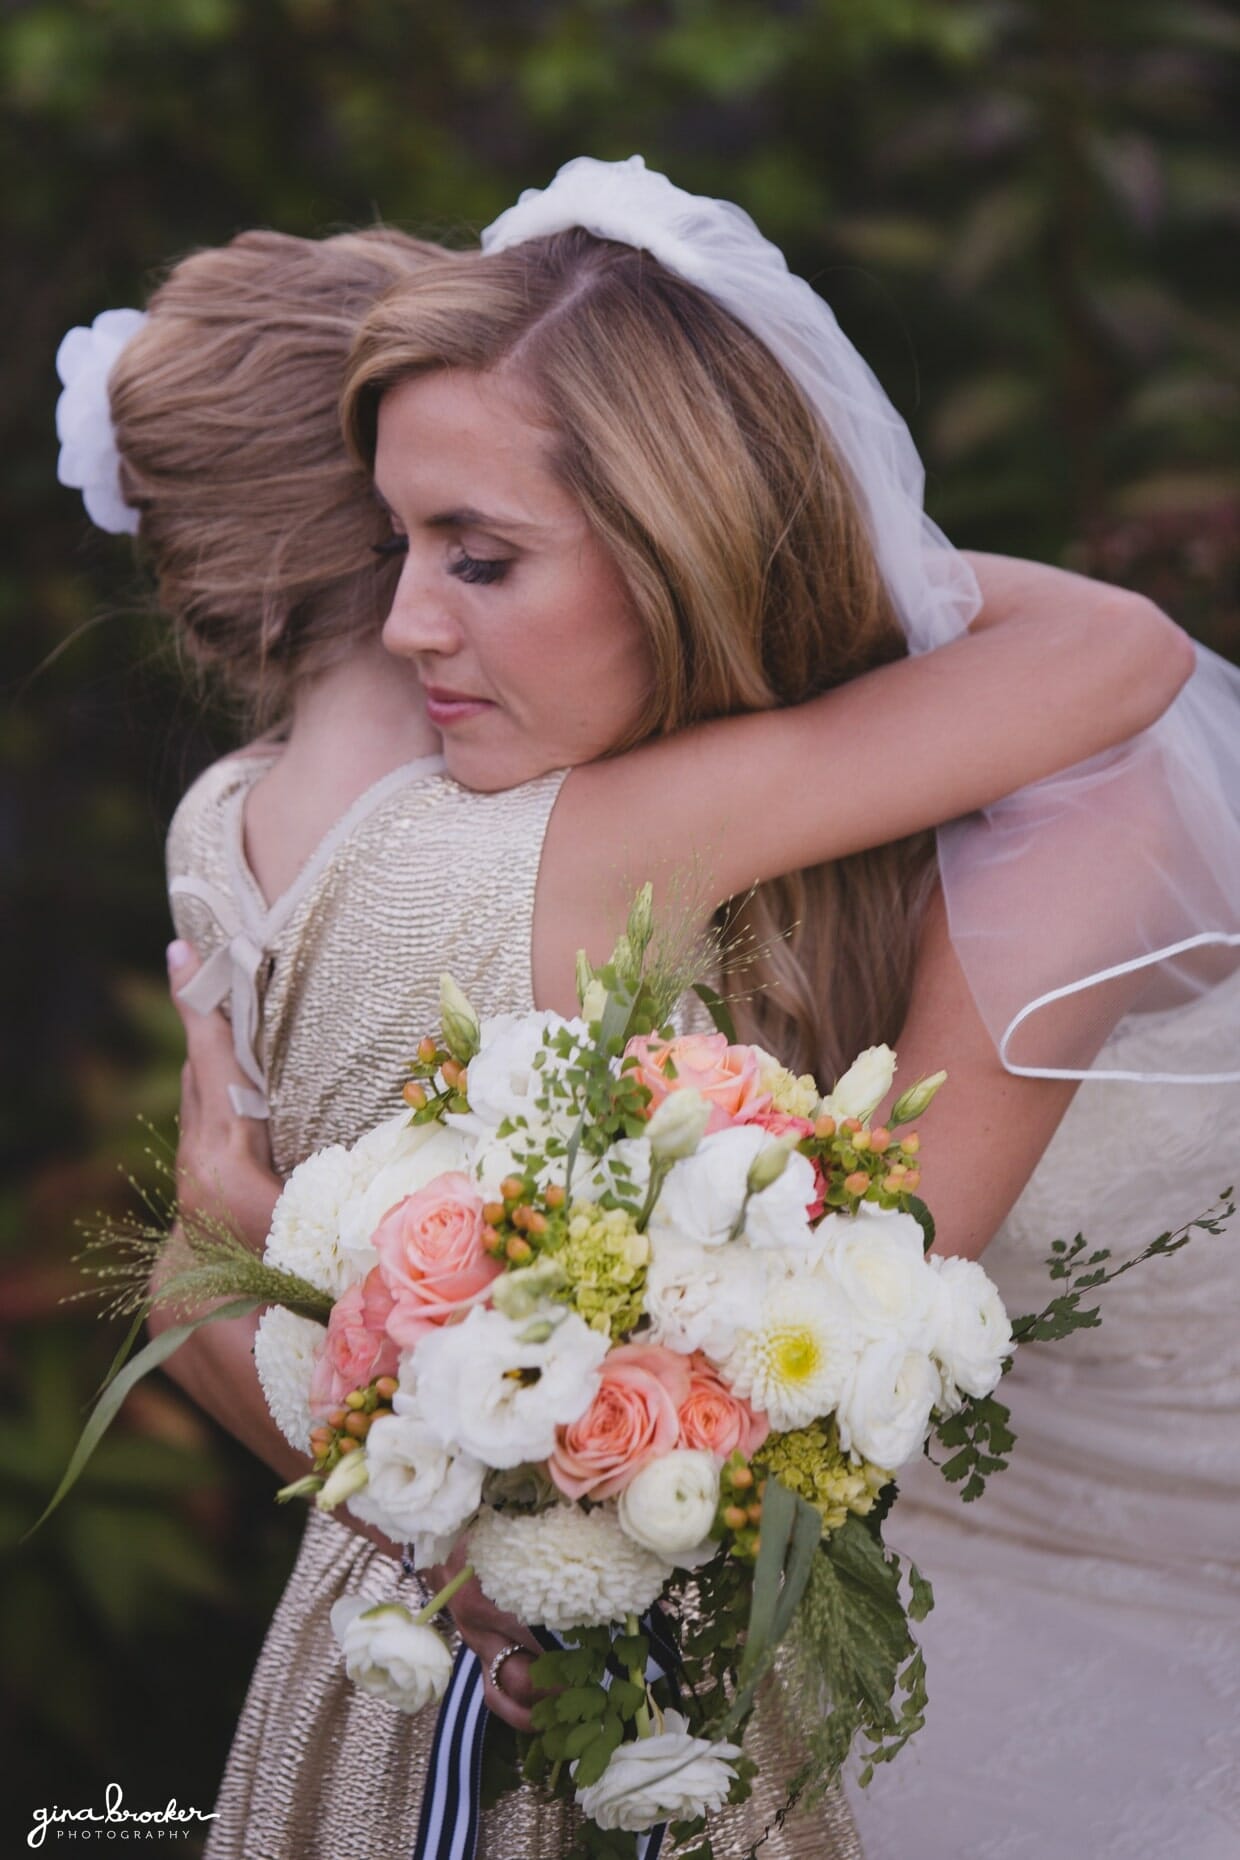 The flower girl gives the bride a big hug after her wedding ceremony at the Westmoor Club in Nantucket, Massachusetts